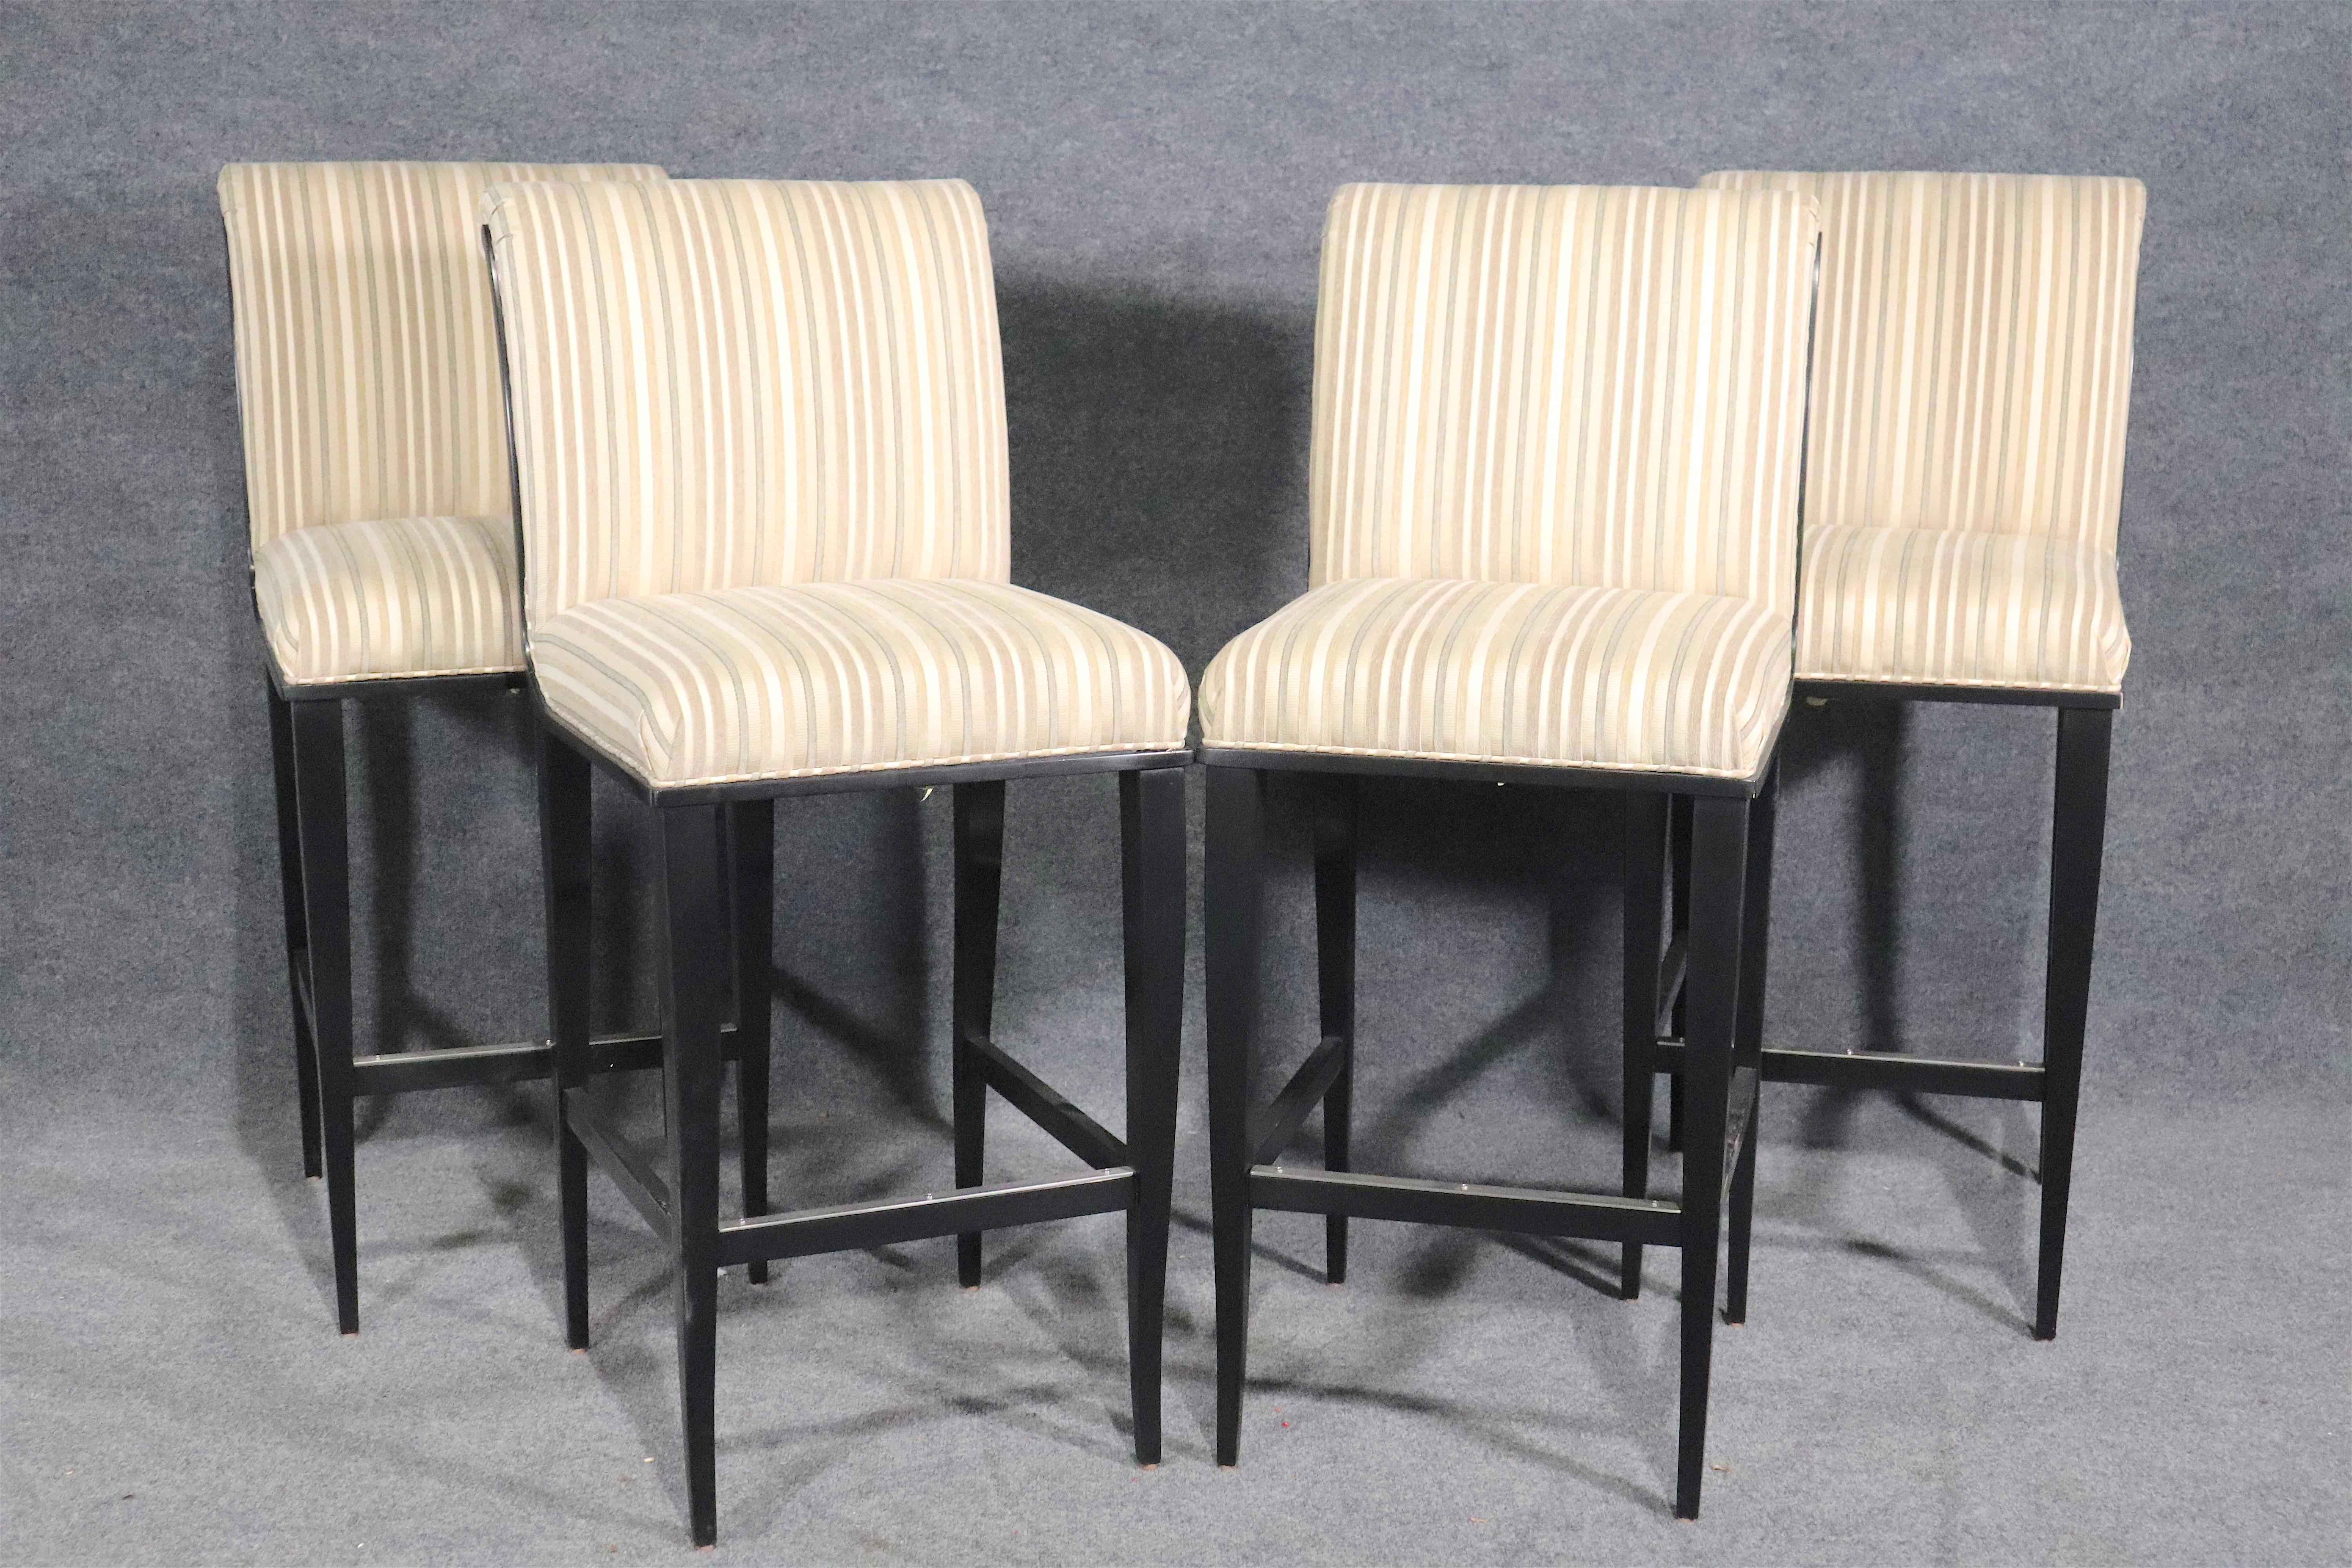 Set of four slipper style seat stools set on black frames with metal footrest.
Please confirm location.